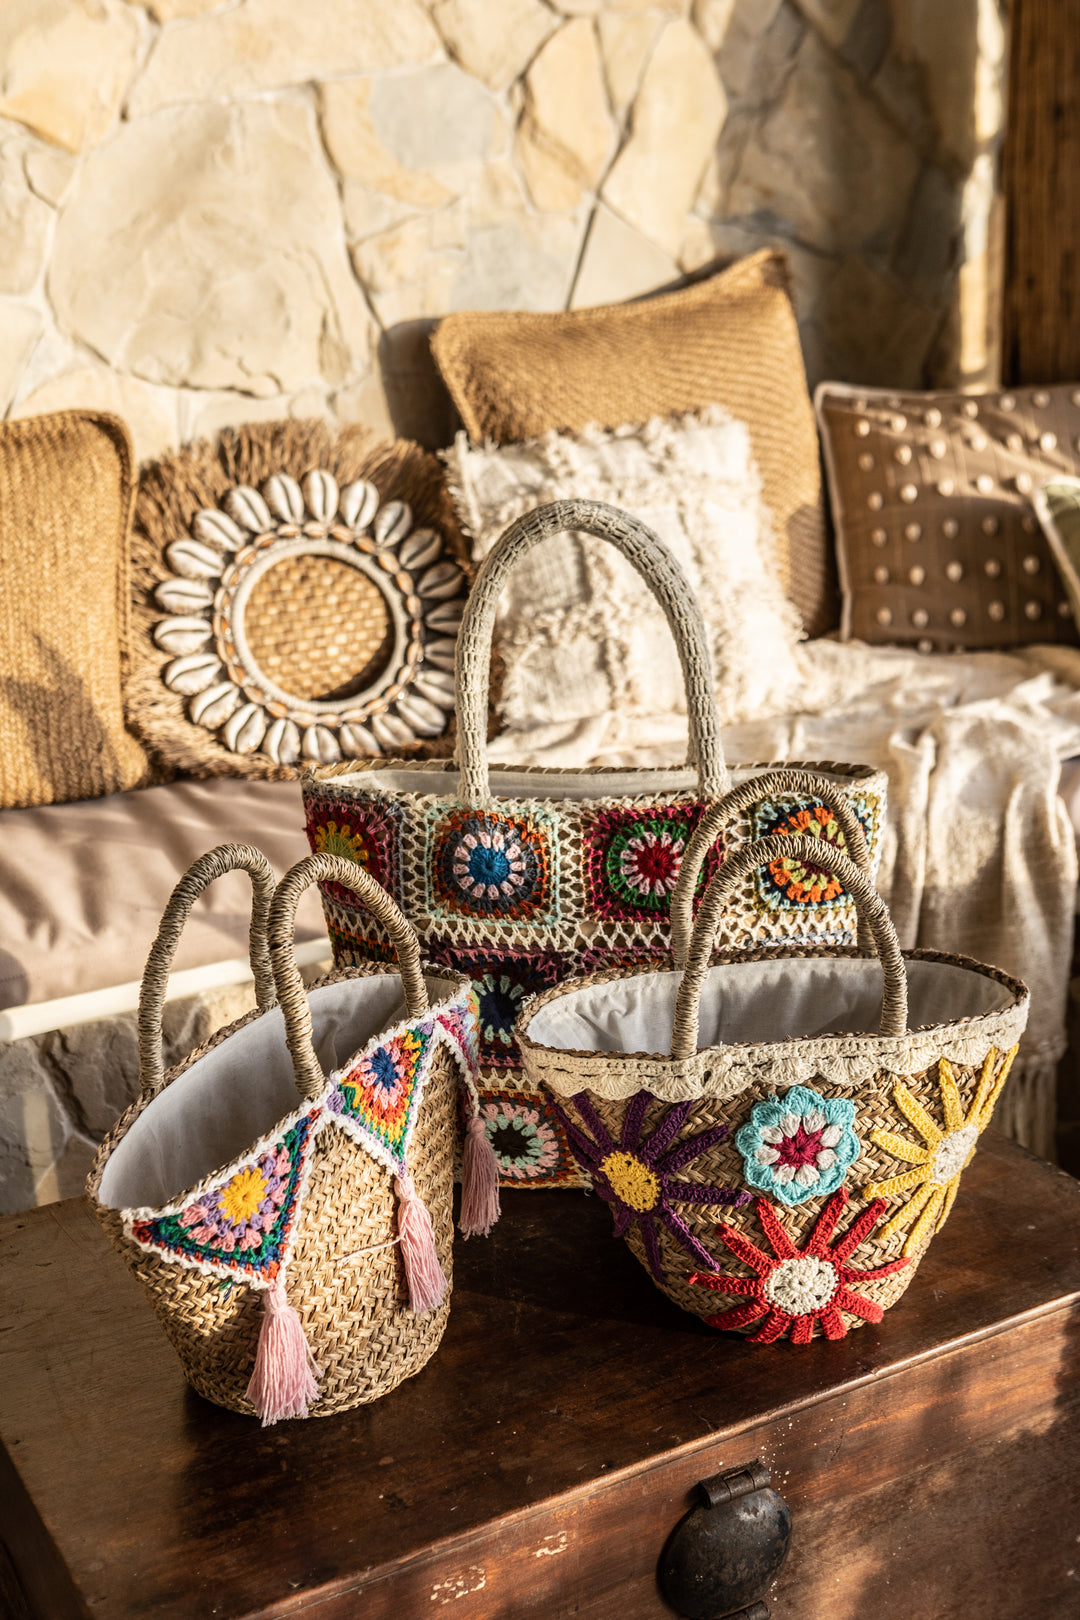 Small colorful wicker bag with pattern